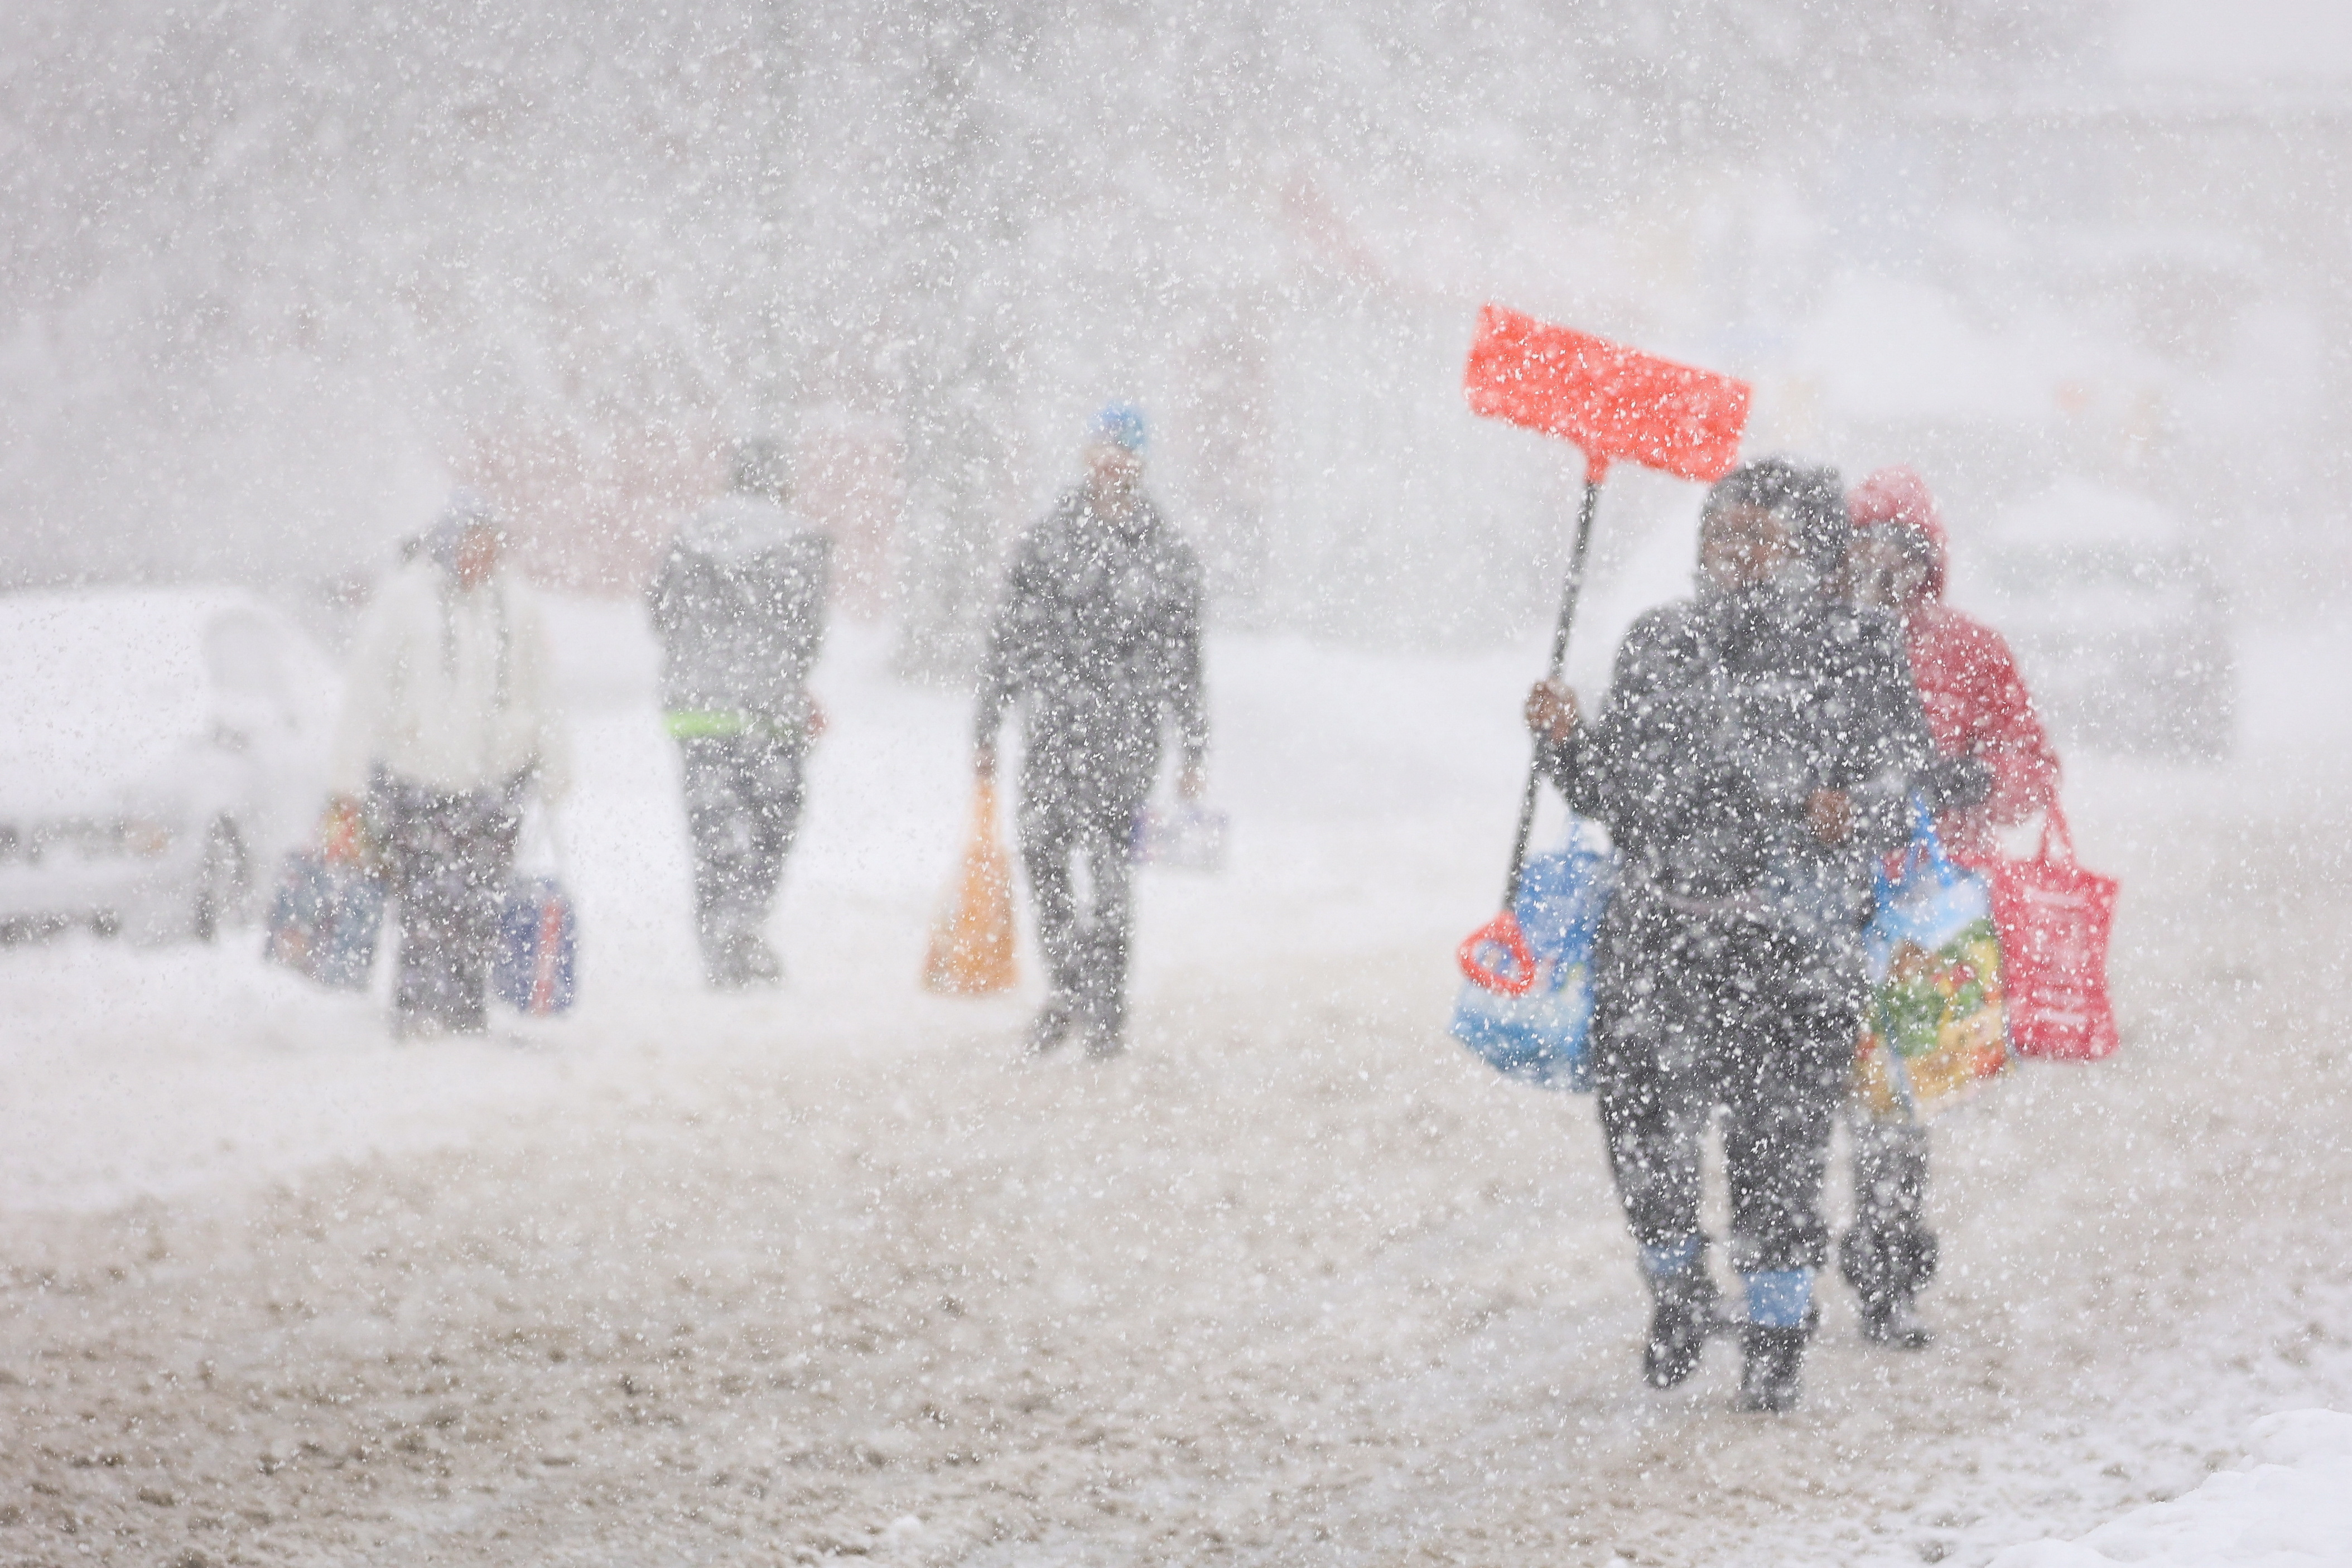 Residents brace for snowstorm in Buffalo, New York